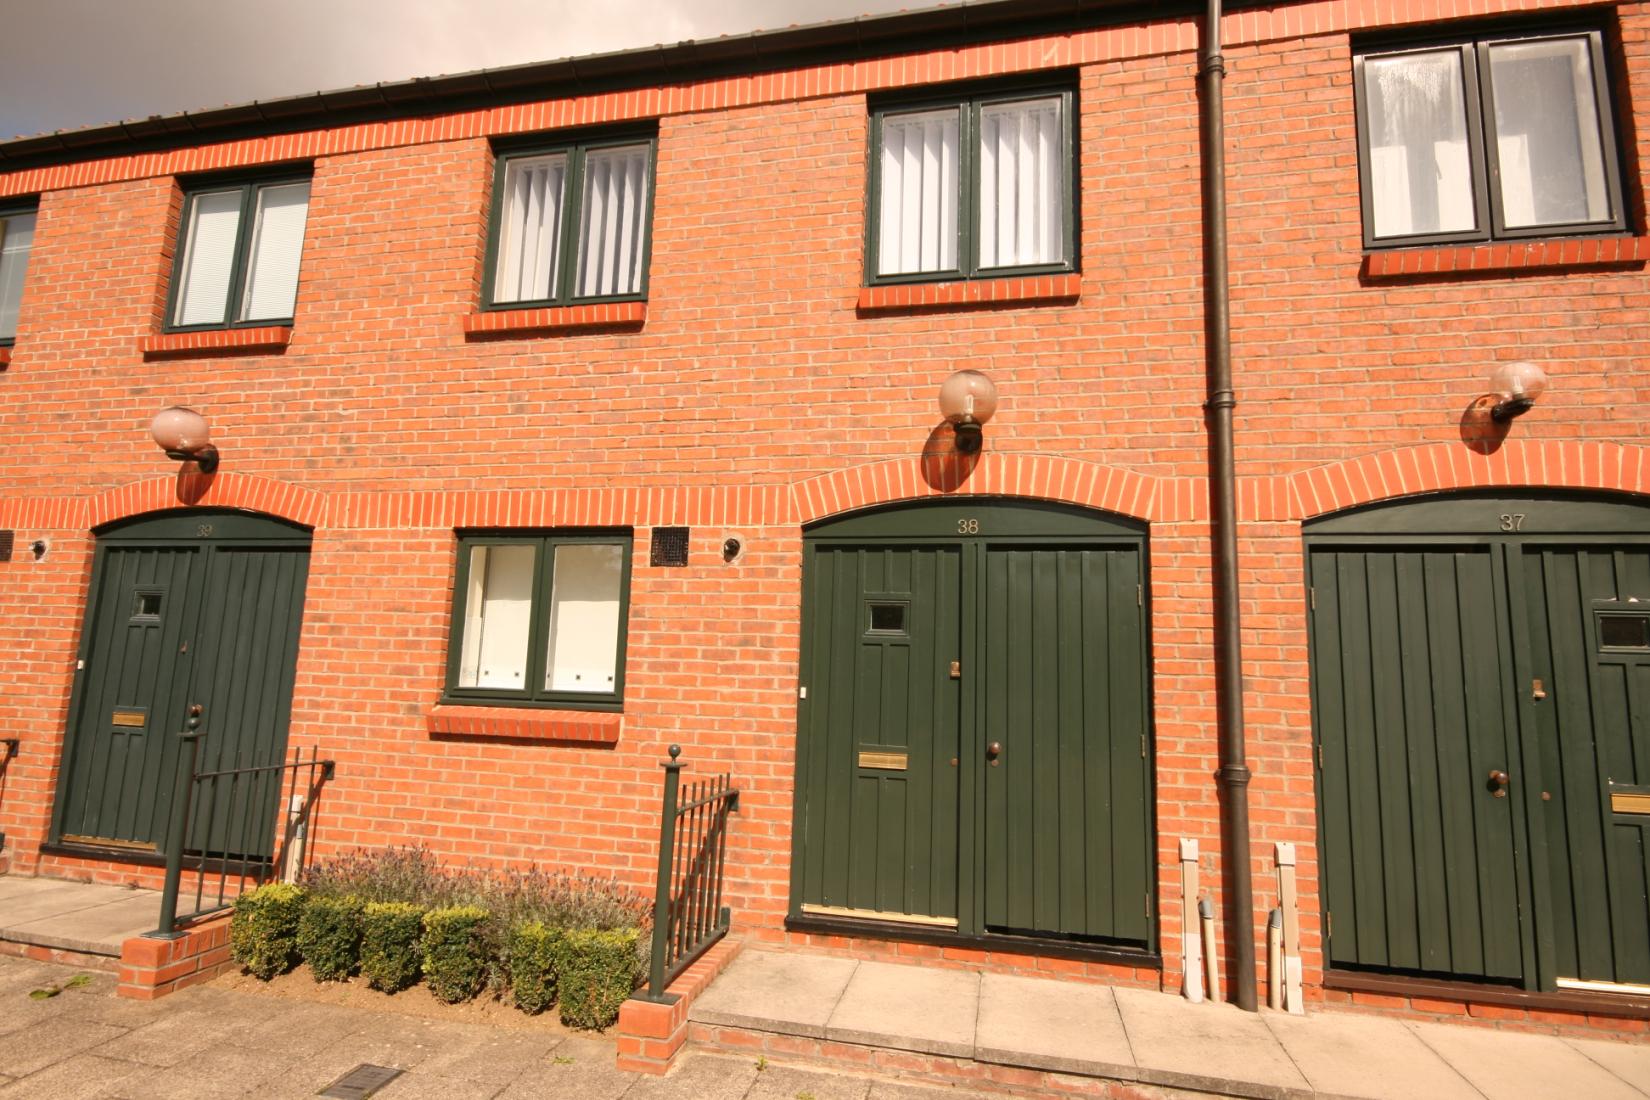 3 bed house to rent - Property Image 1